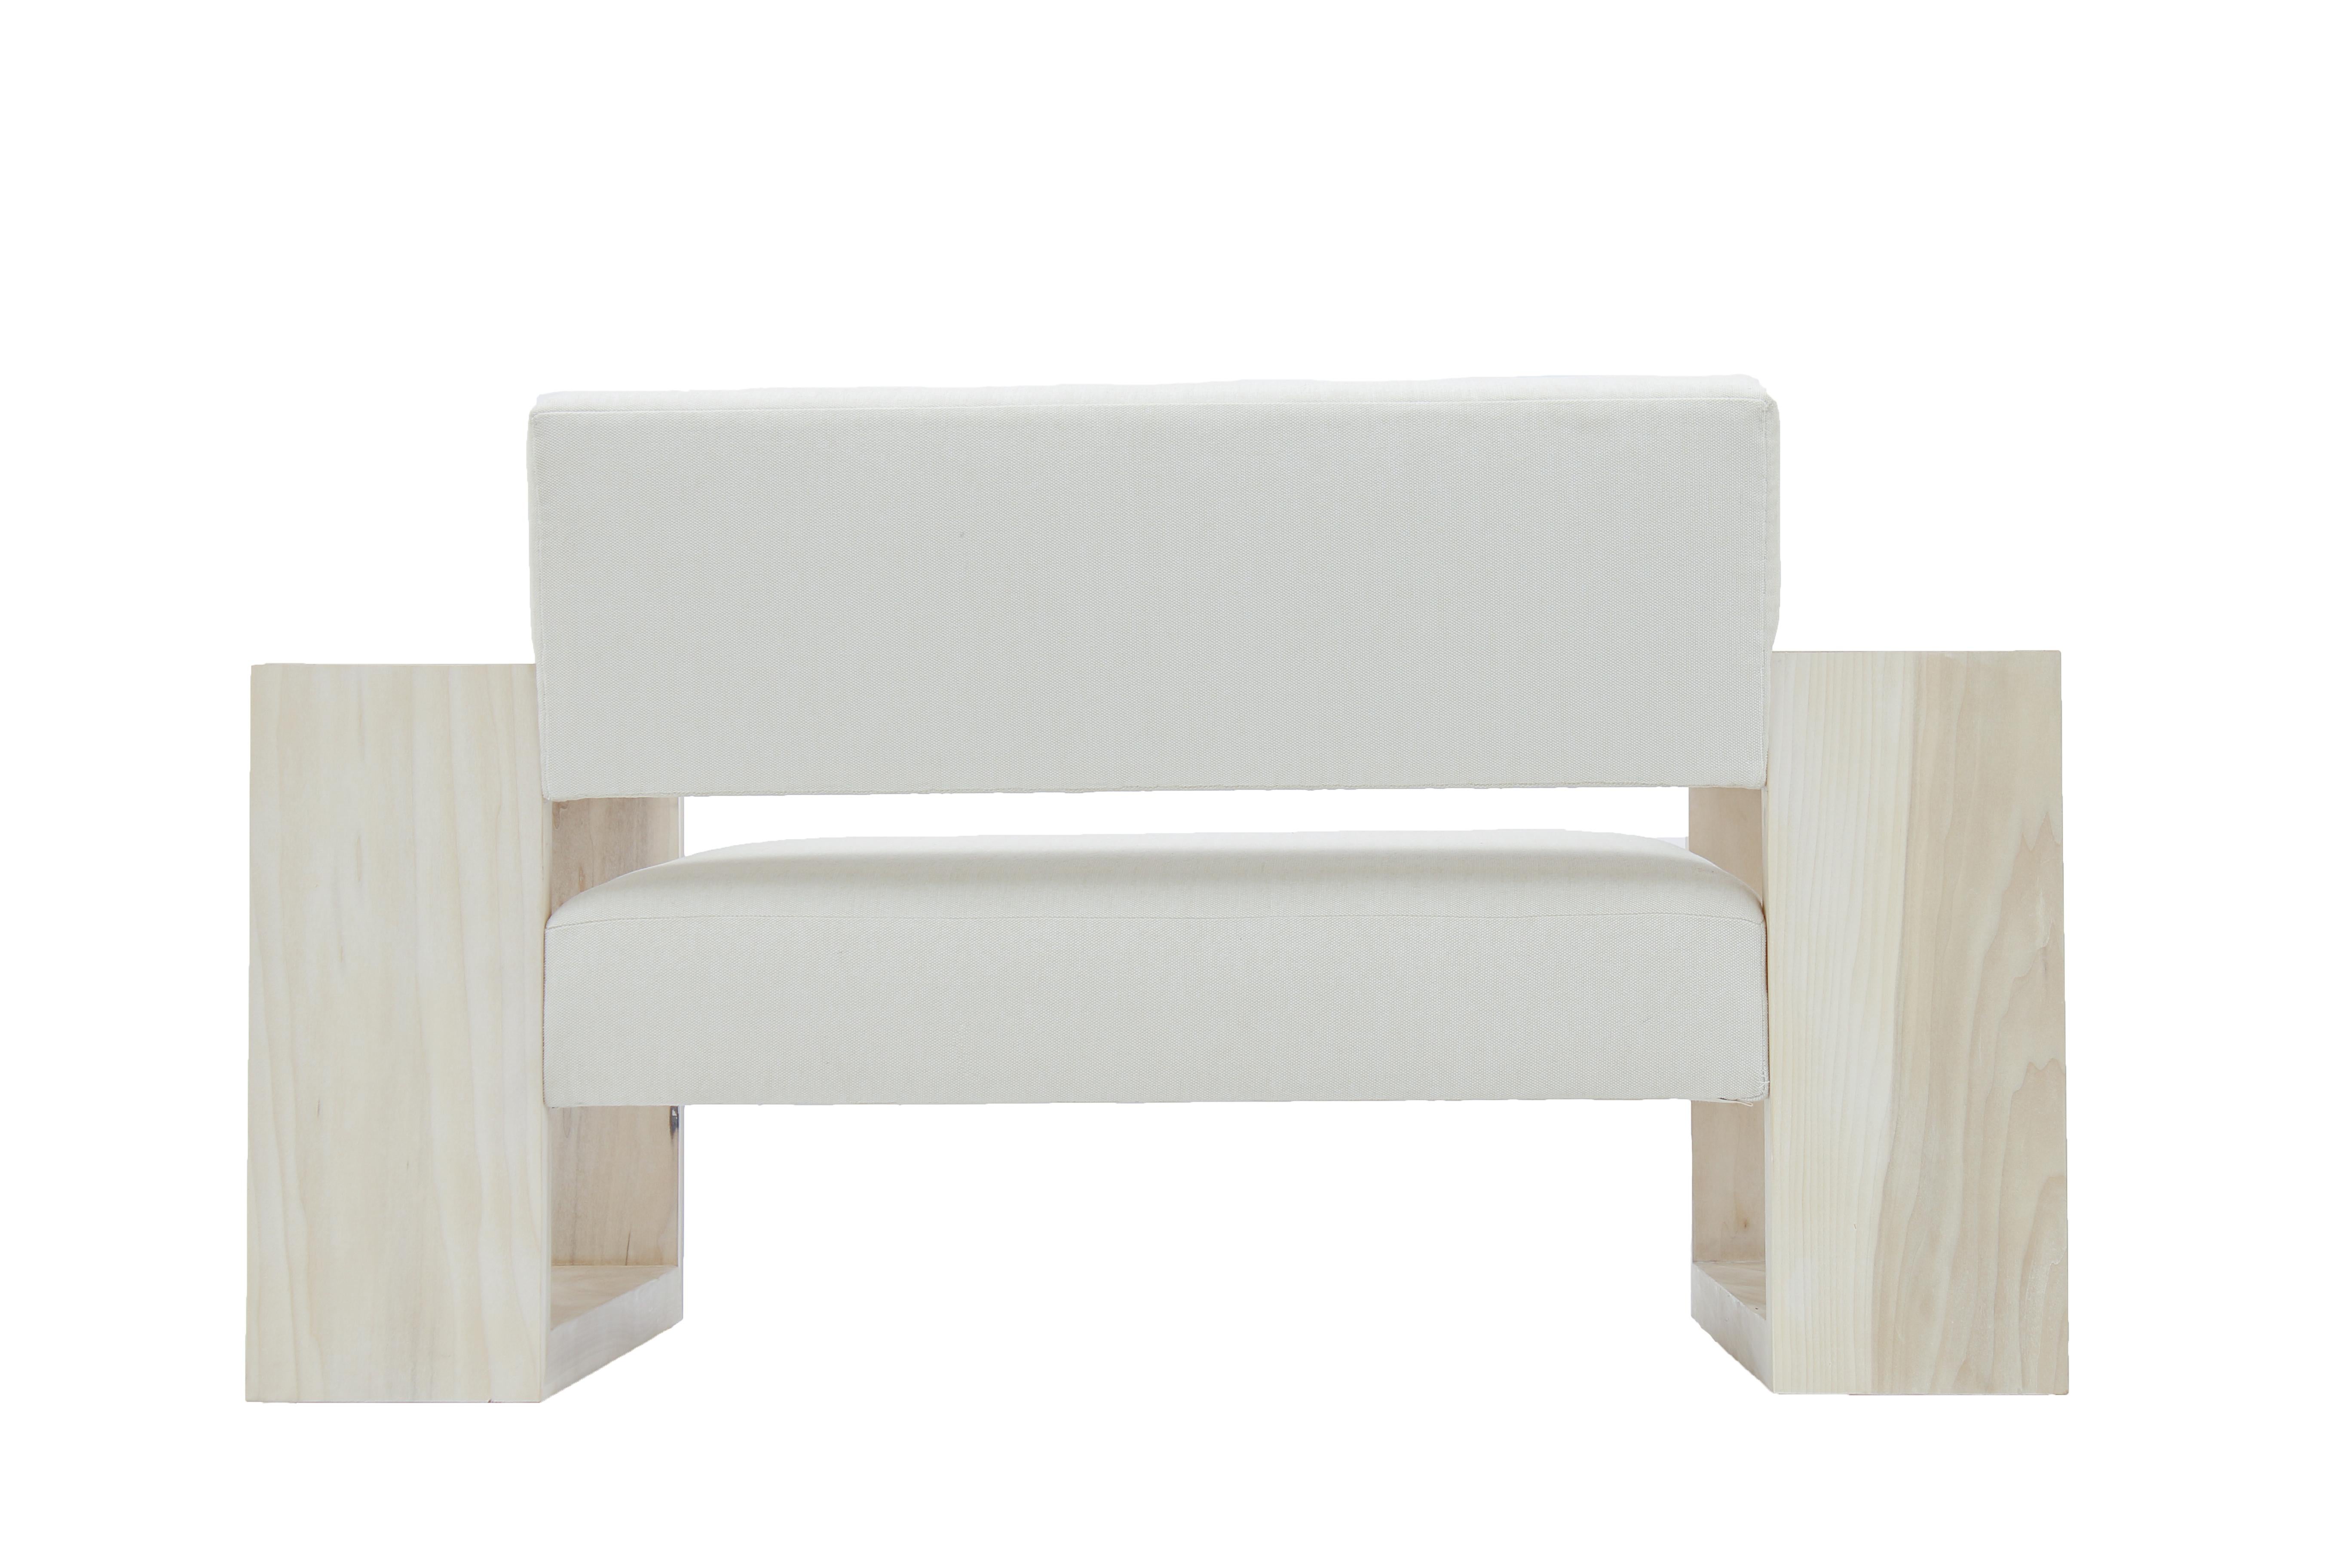 Hand-Crafted James de Wulf Le Blanc Series, Chair 'Poplar' For Sale